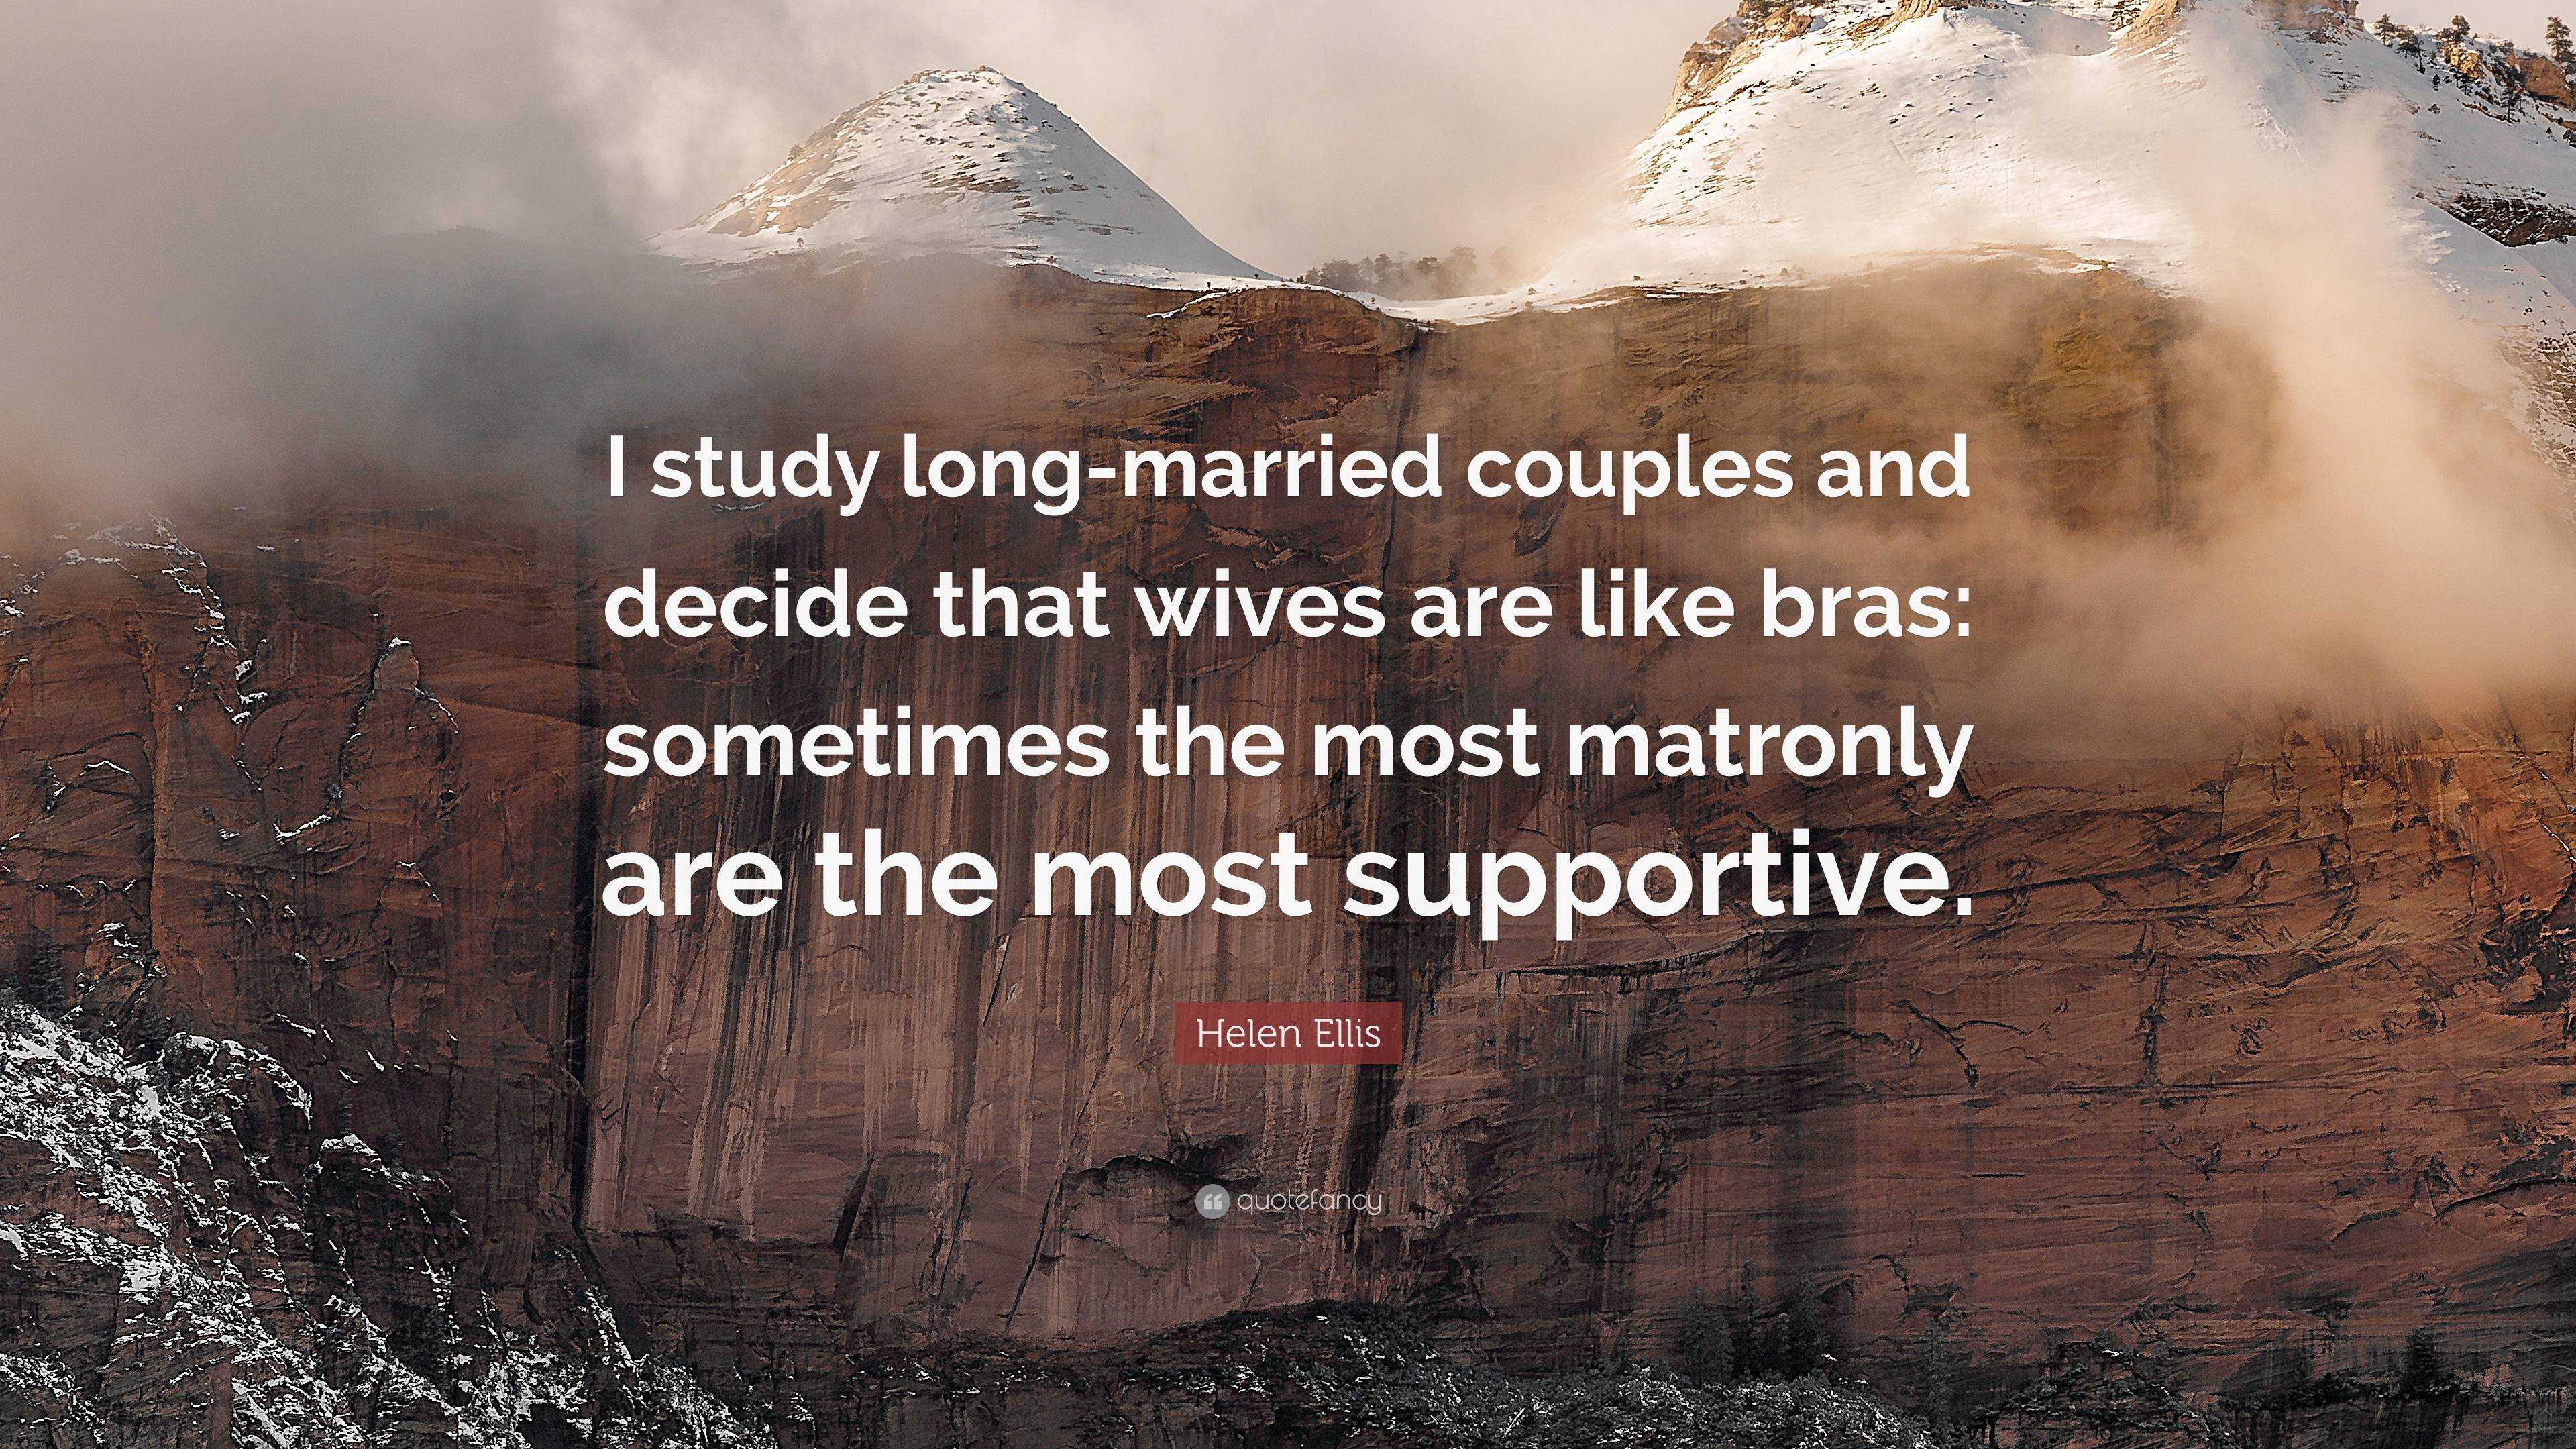 Helen Ellis Quote: “I study long-married couples and decide that wives are  like bras: sometimes